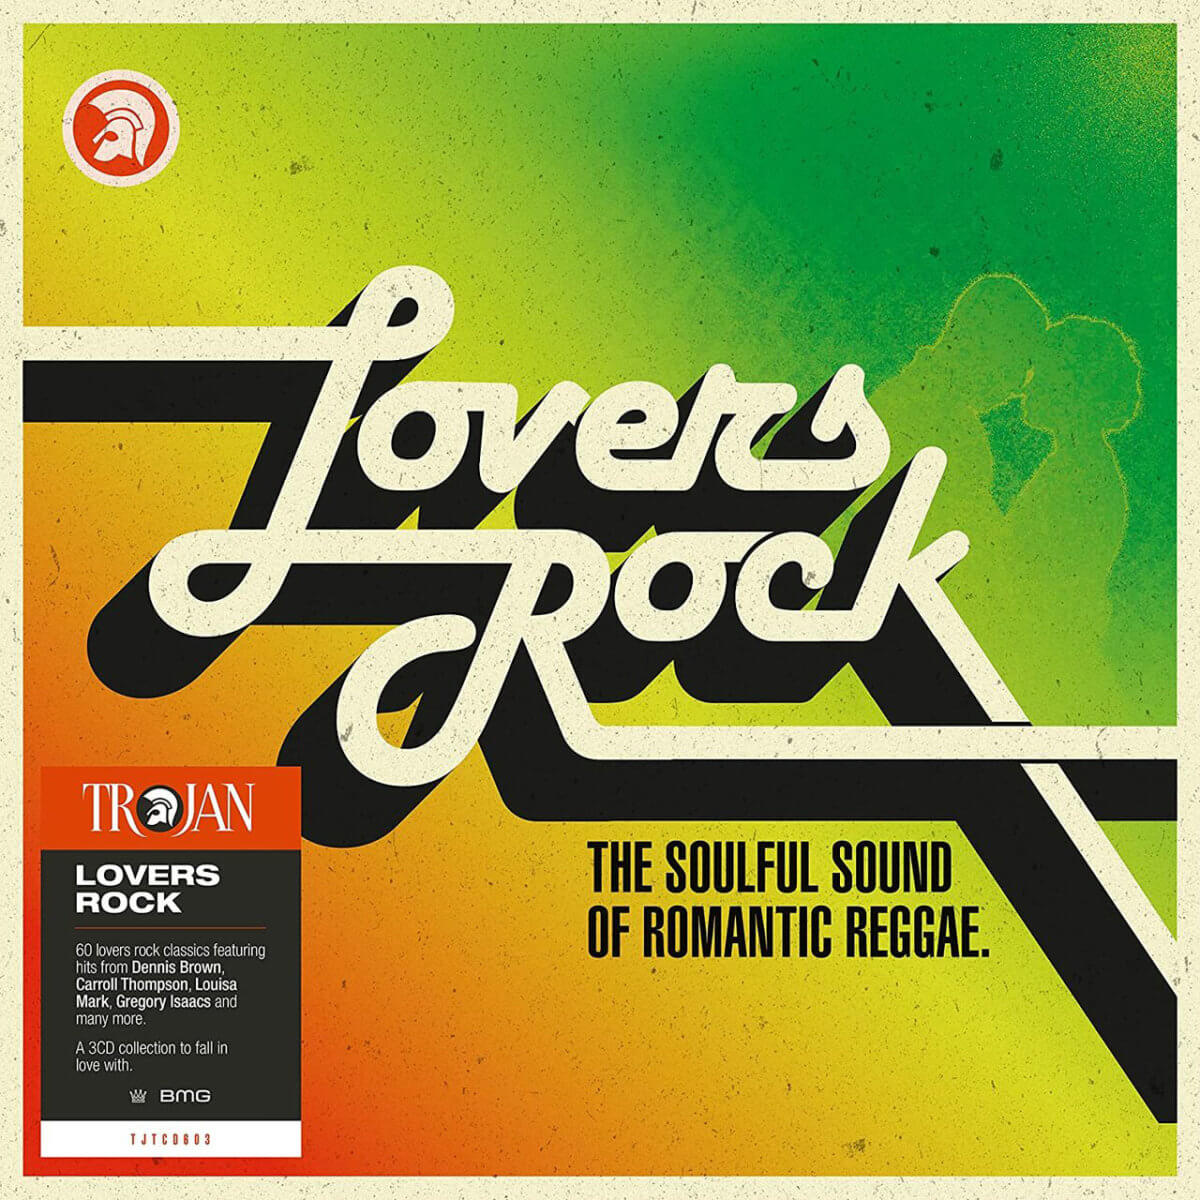 Cover of “Lovers Rock.”